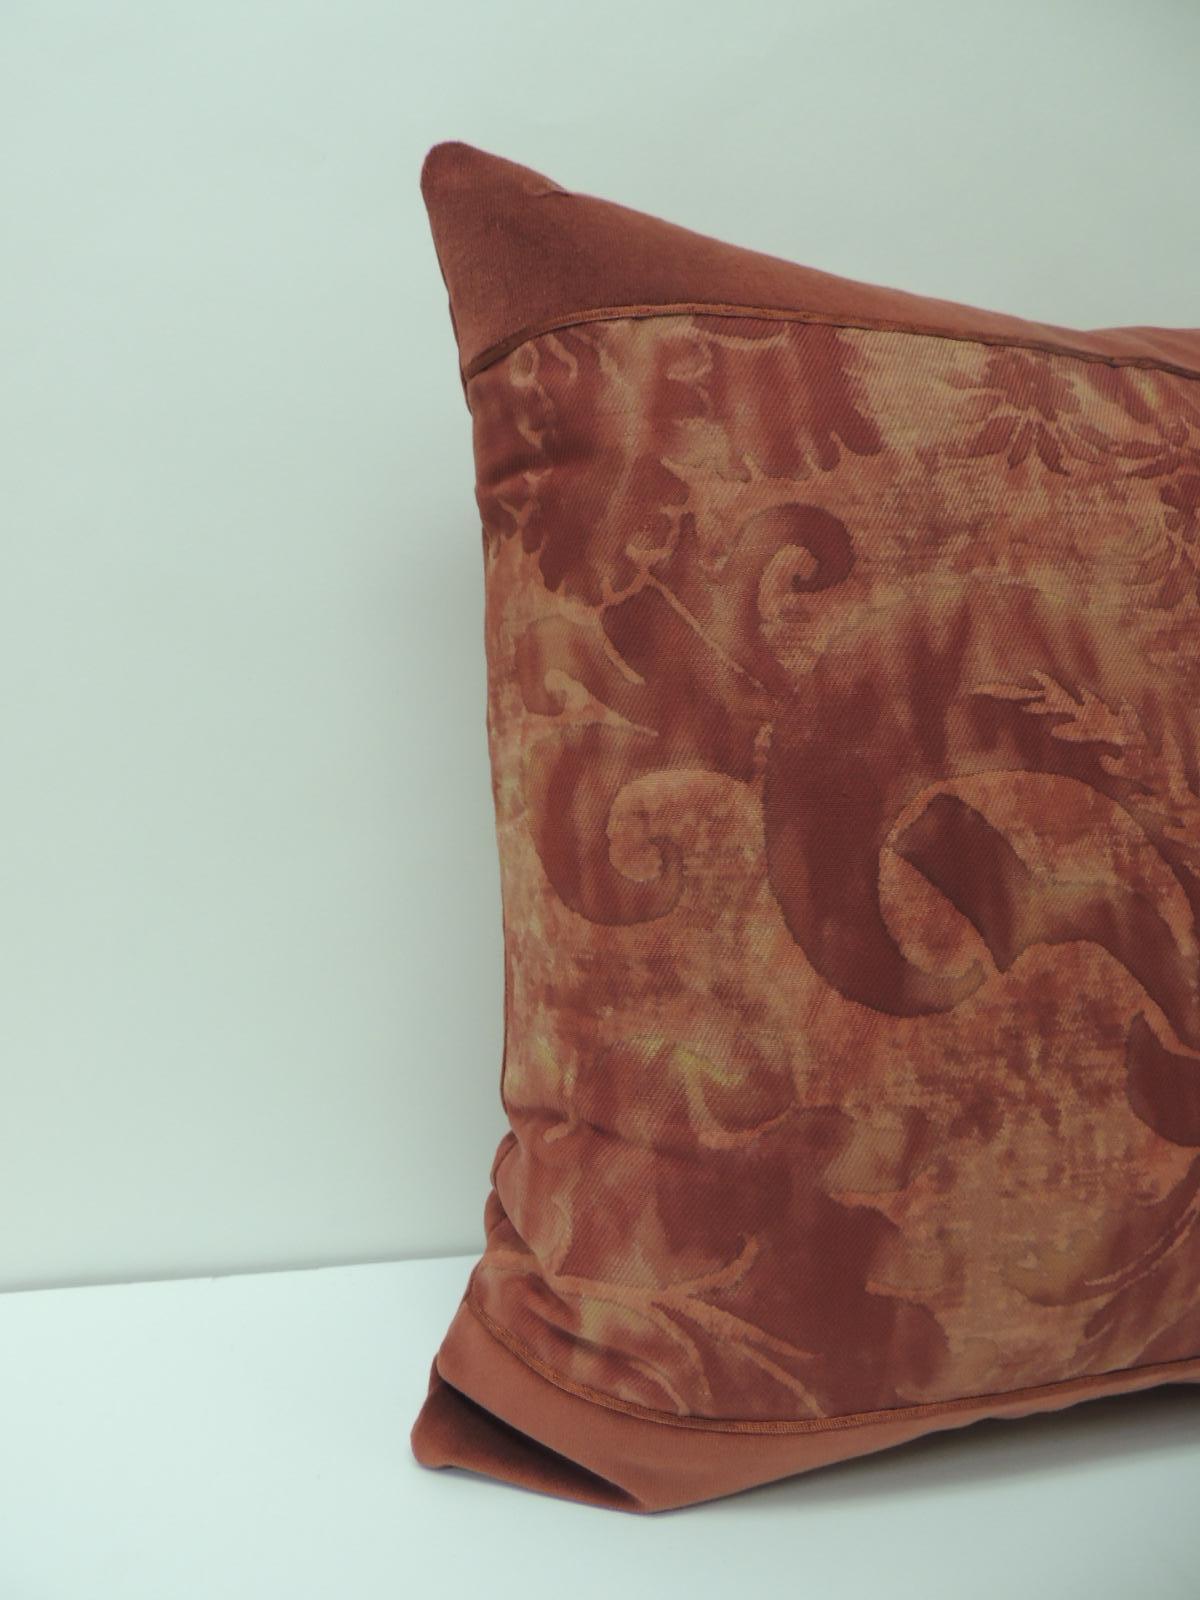 Vintage Fortuny “Glicine” pattern red and silvery decorative square pillow. Framed with burnt orange cotton velvet and embellished with small silk orange trim at seams. Backed with red cashmere fabric. This pillow were designed using the reverse